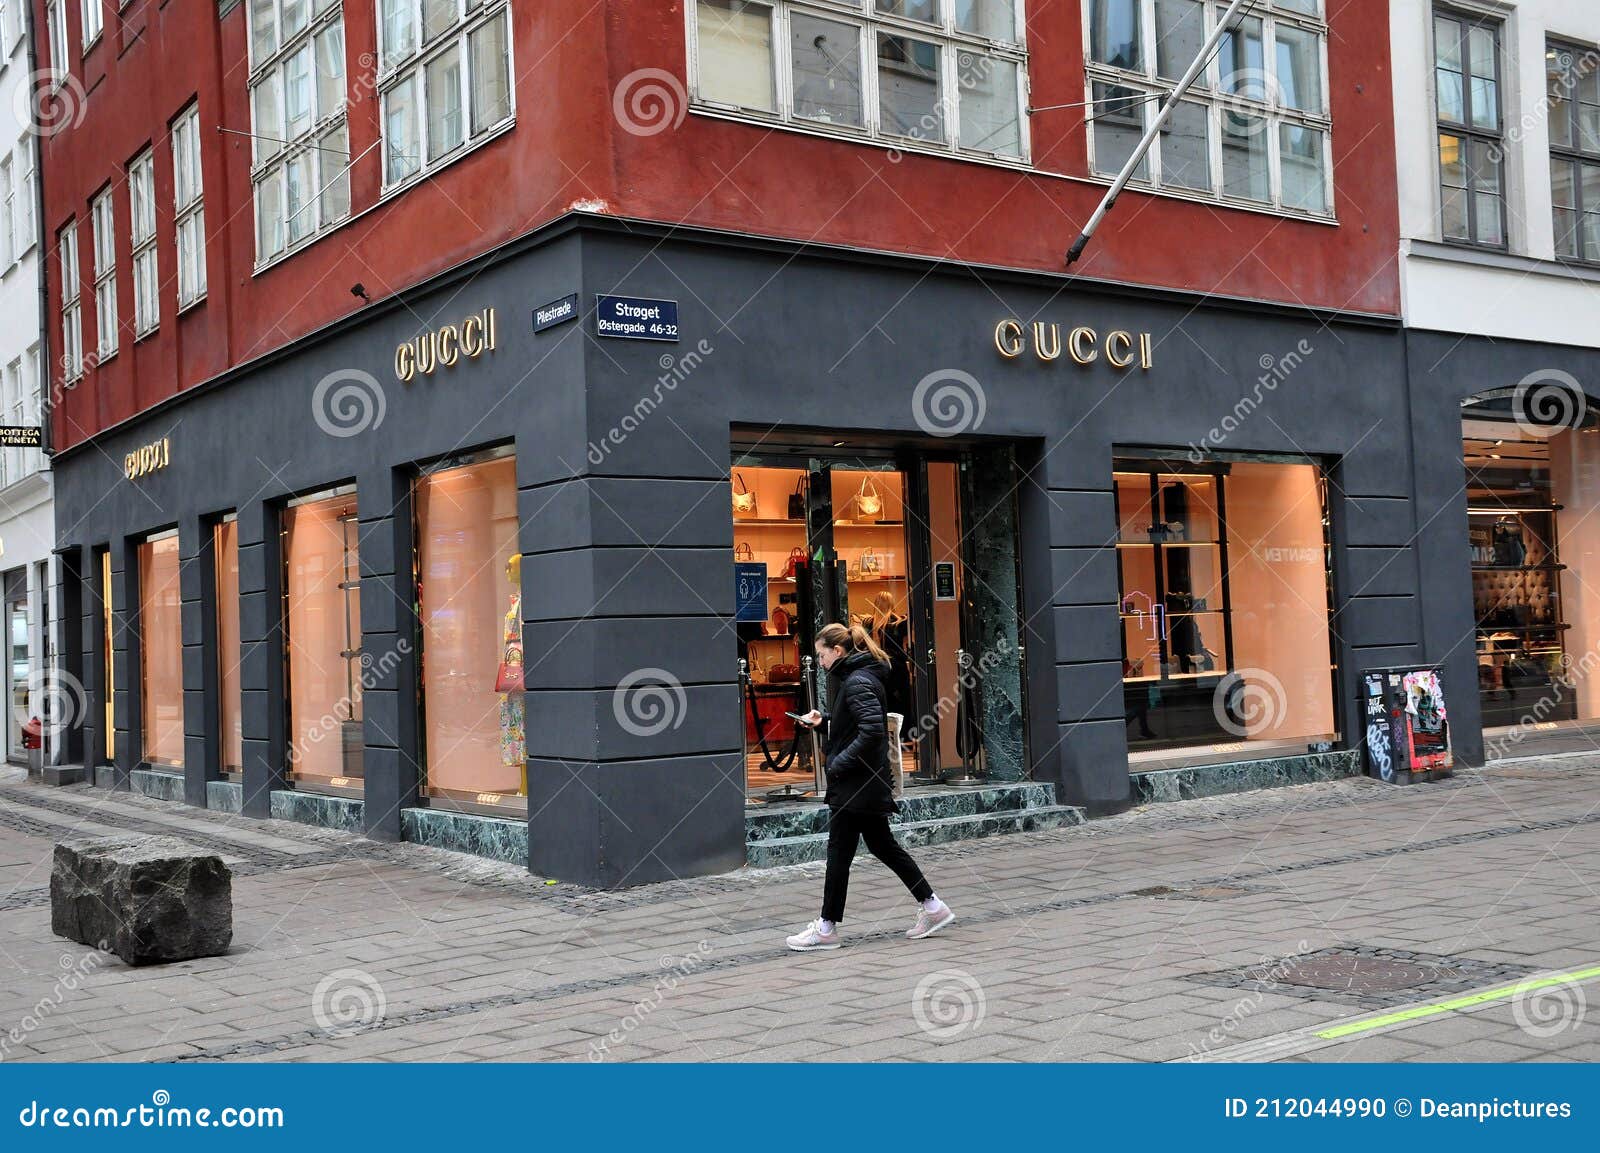 Gucci Store Reopen Long Time Locdown Denmark Editorial Image - Image consumers: 212044990